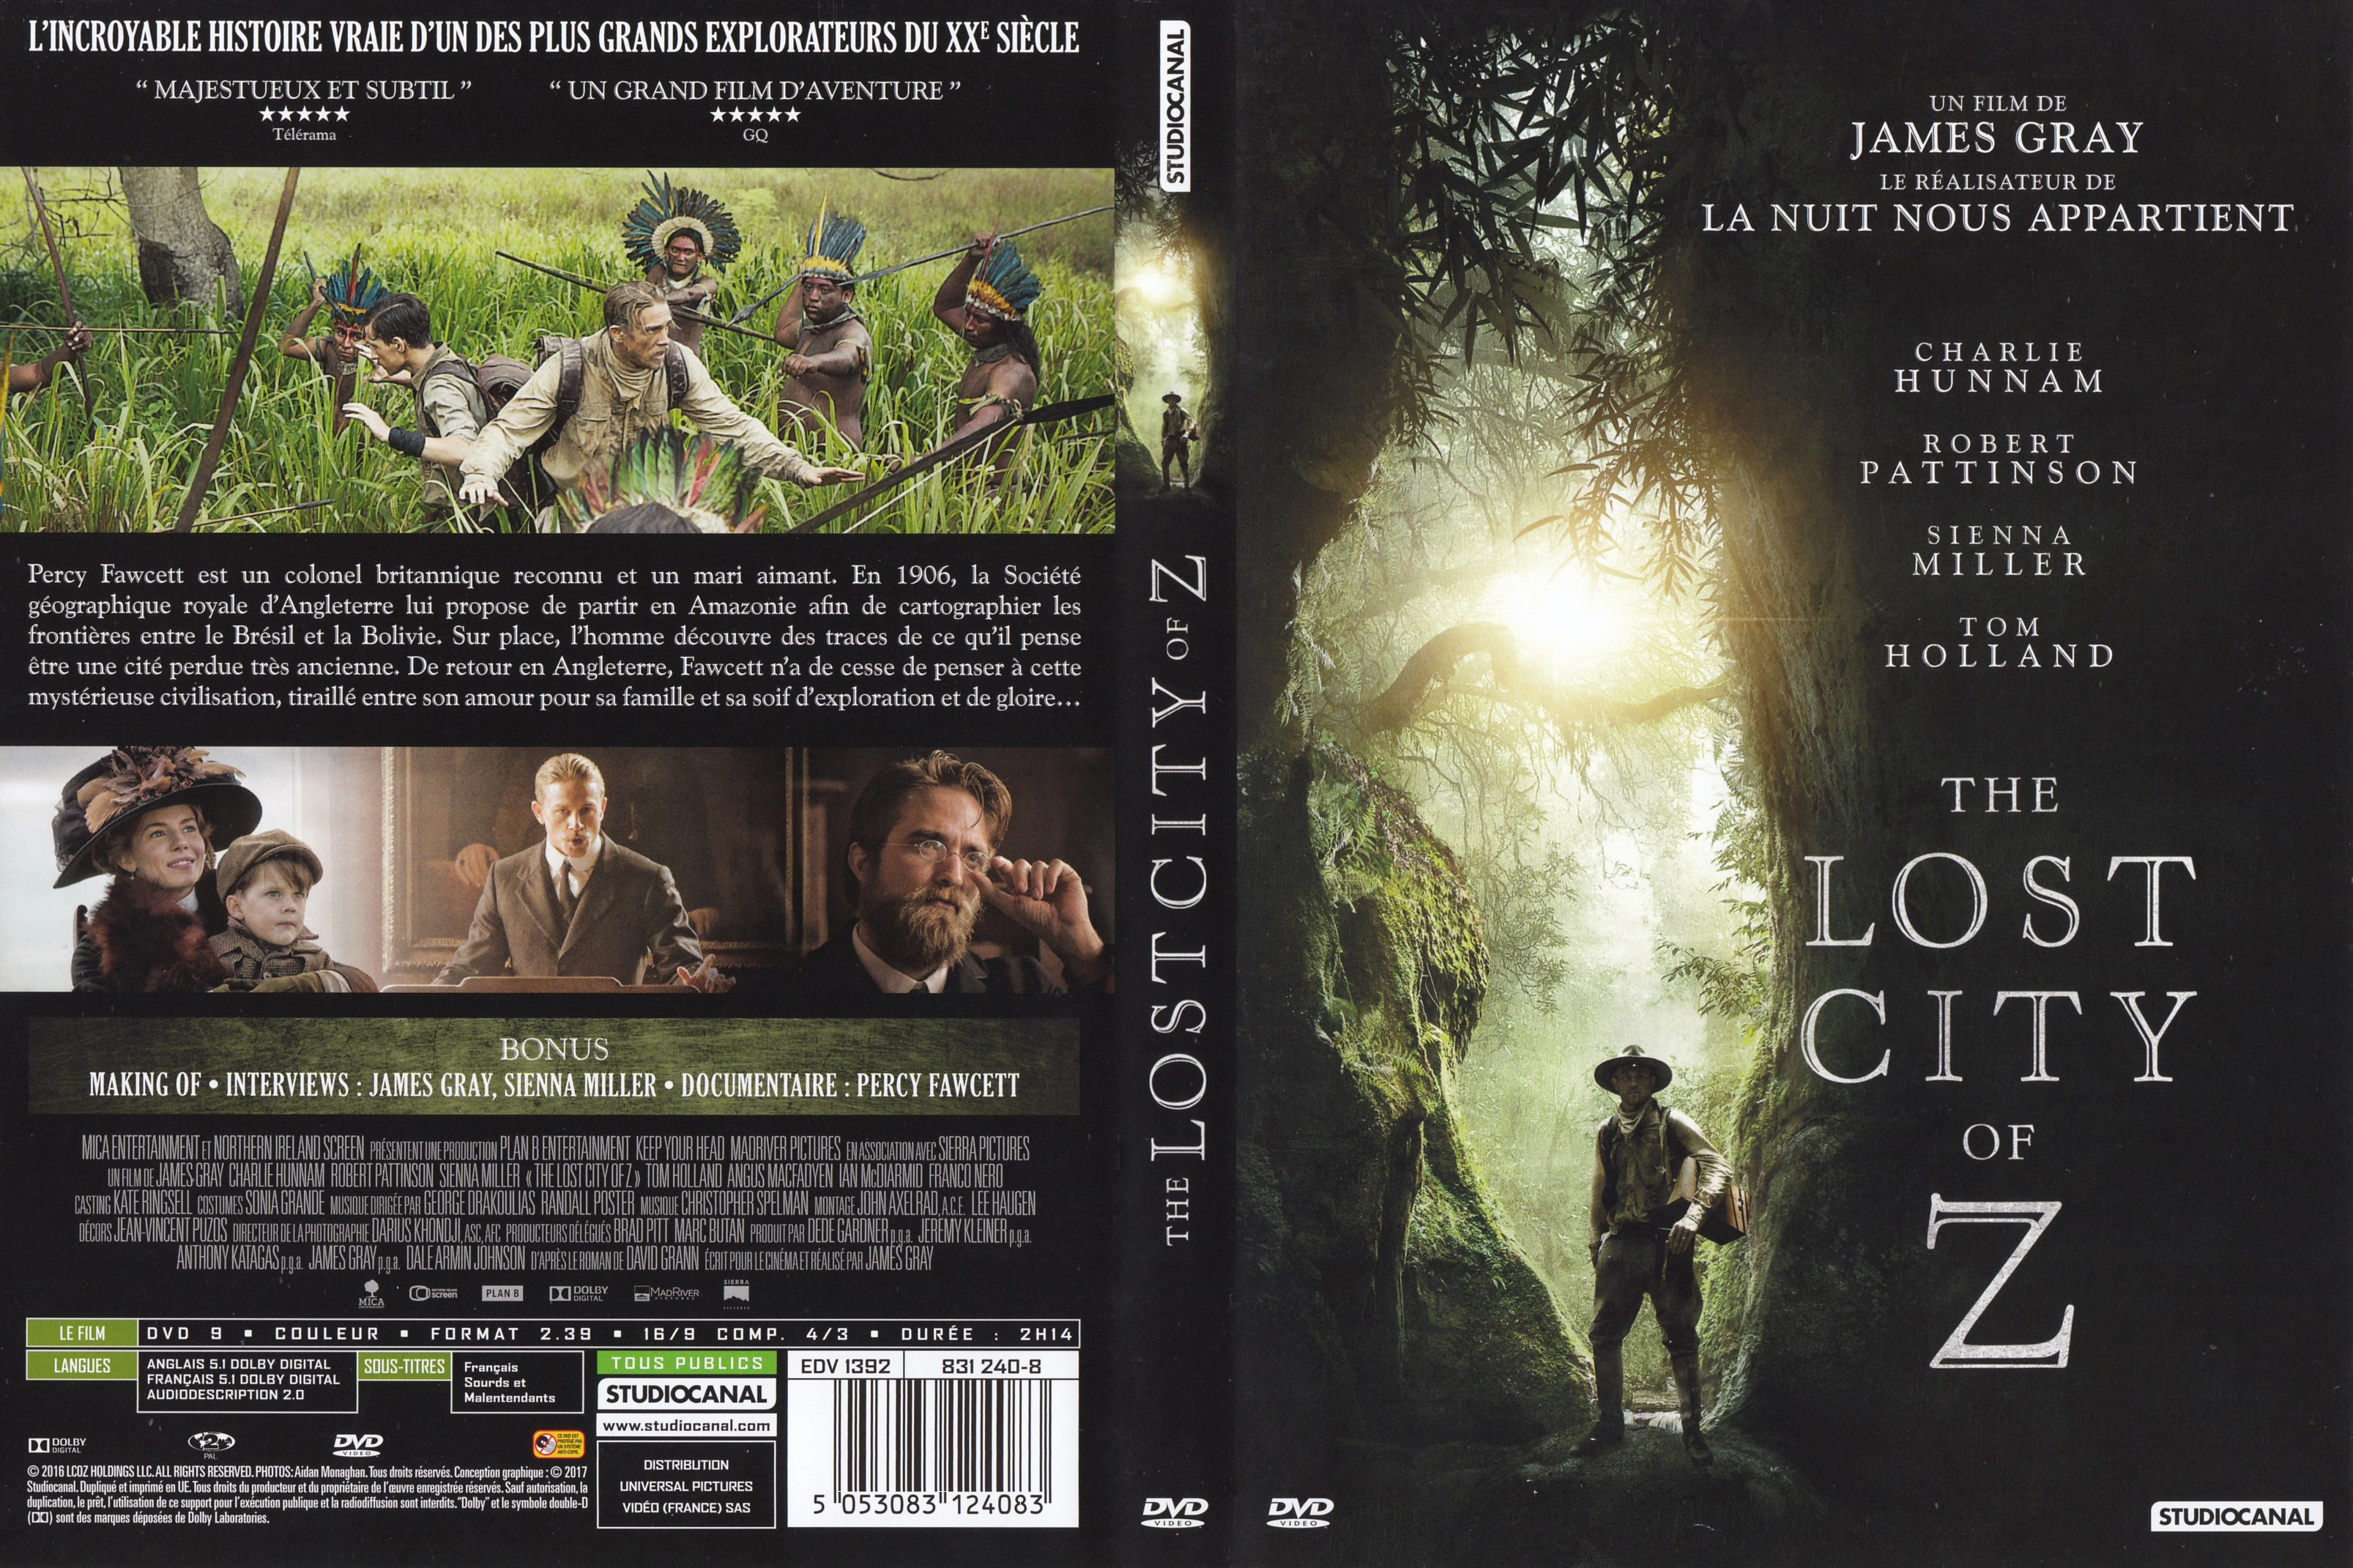 Jaquette DVD The Lost City of Z